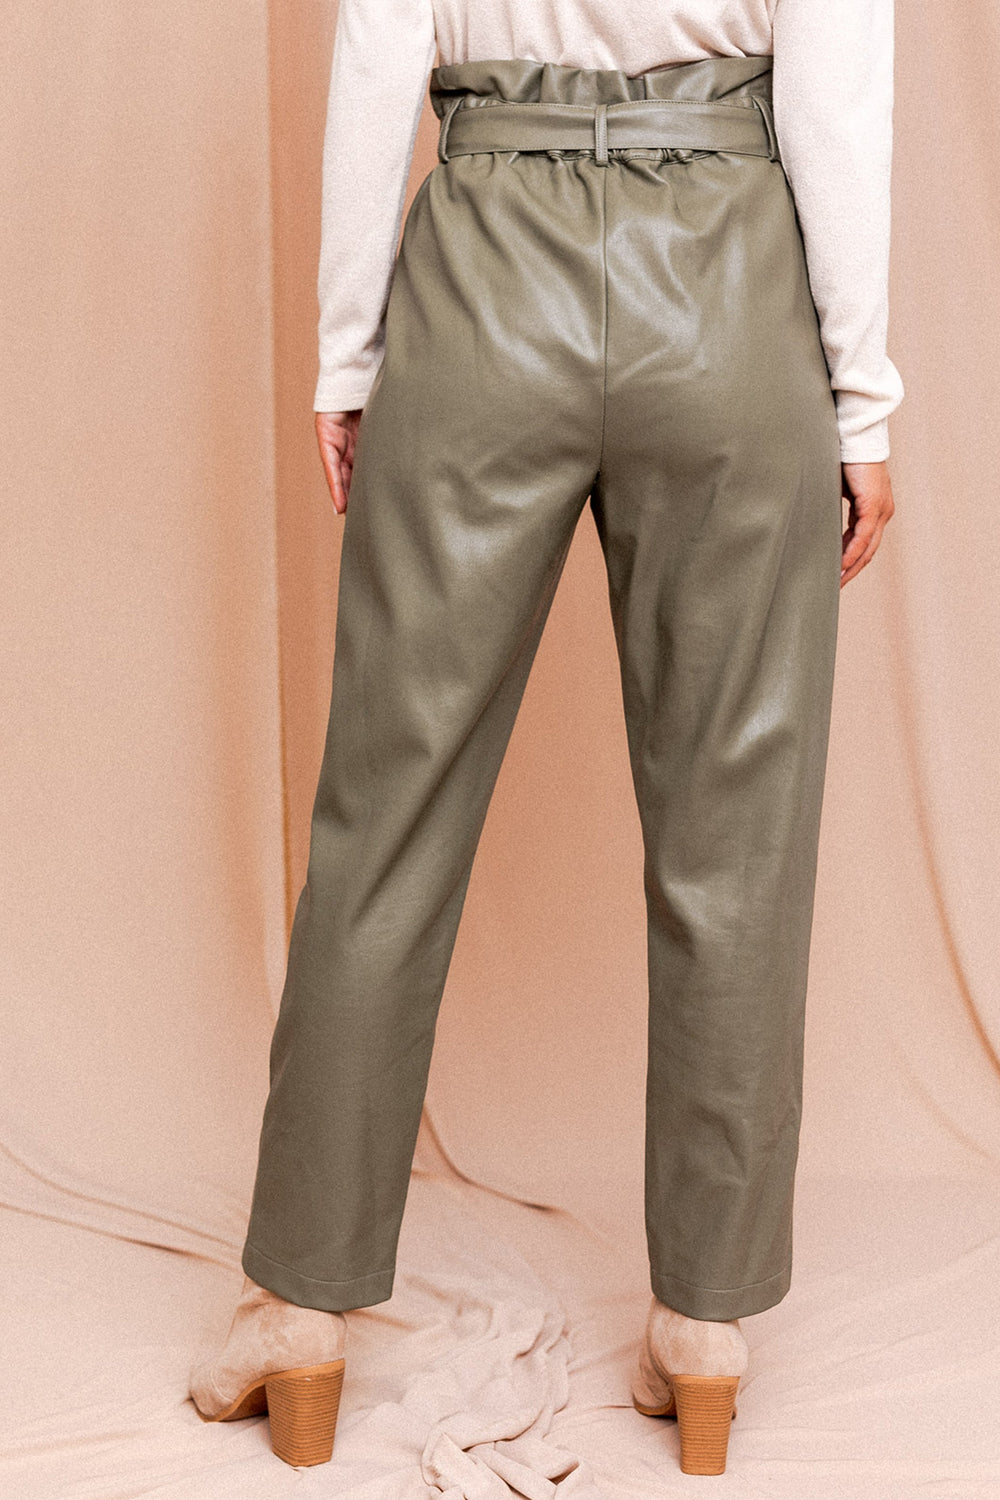 Petal and Pup USA BOTTOMS Hamilton Faux Leather Pants - Olive